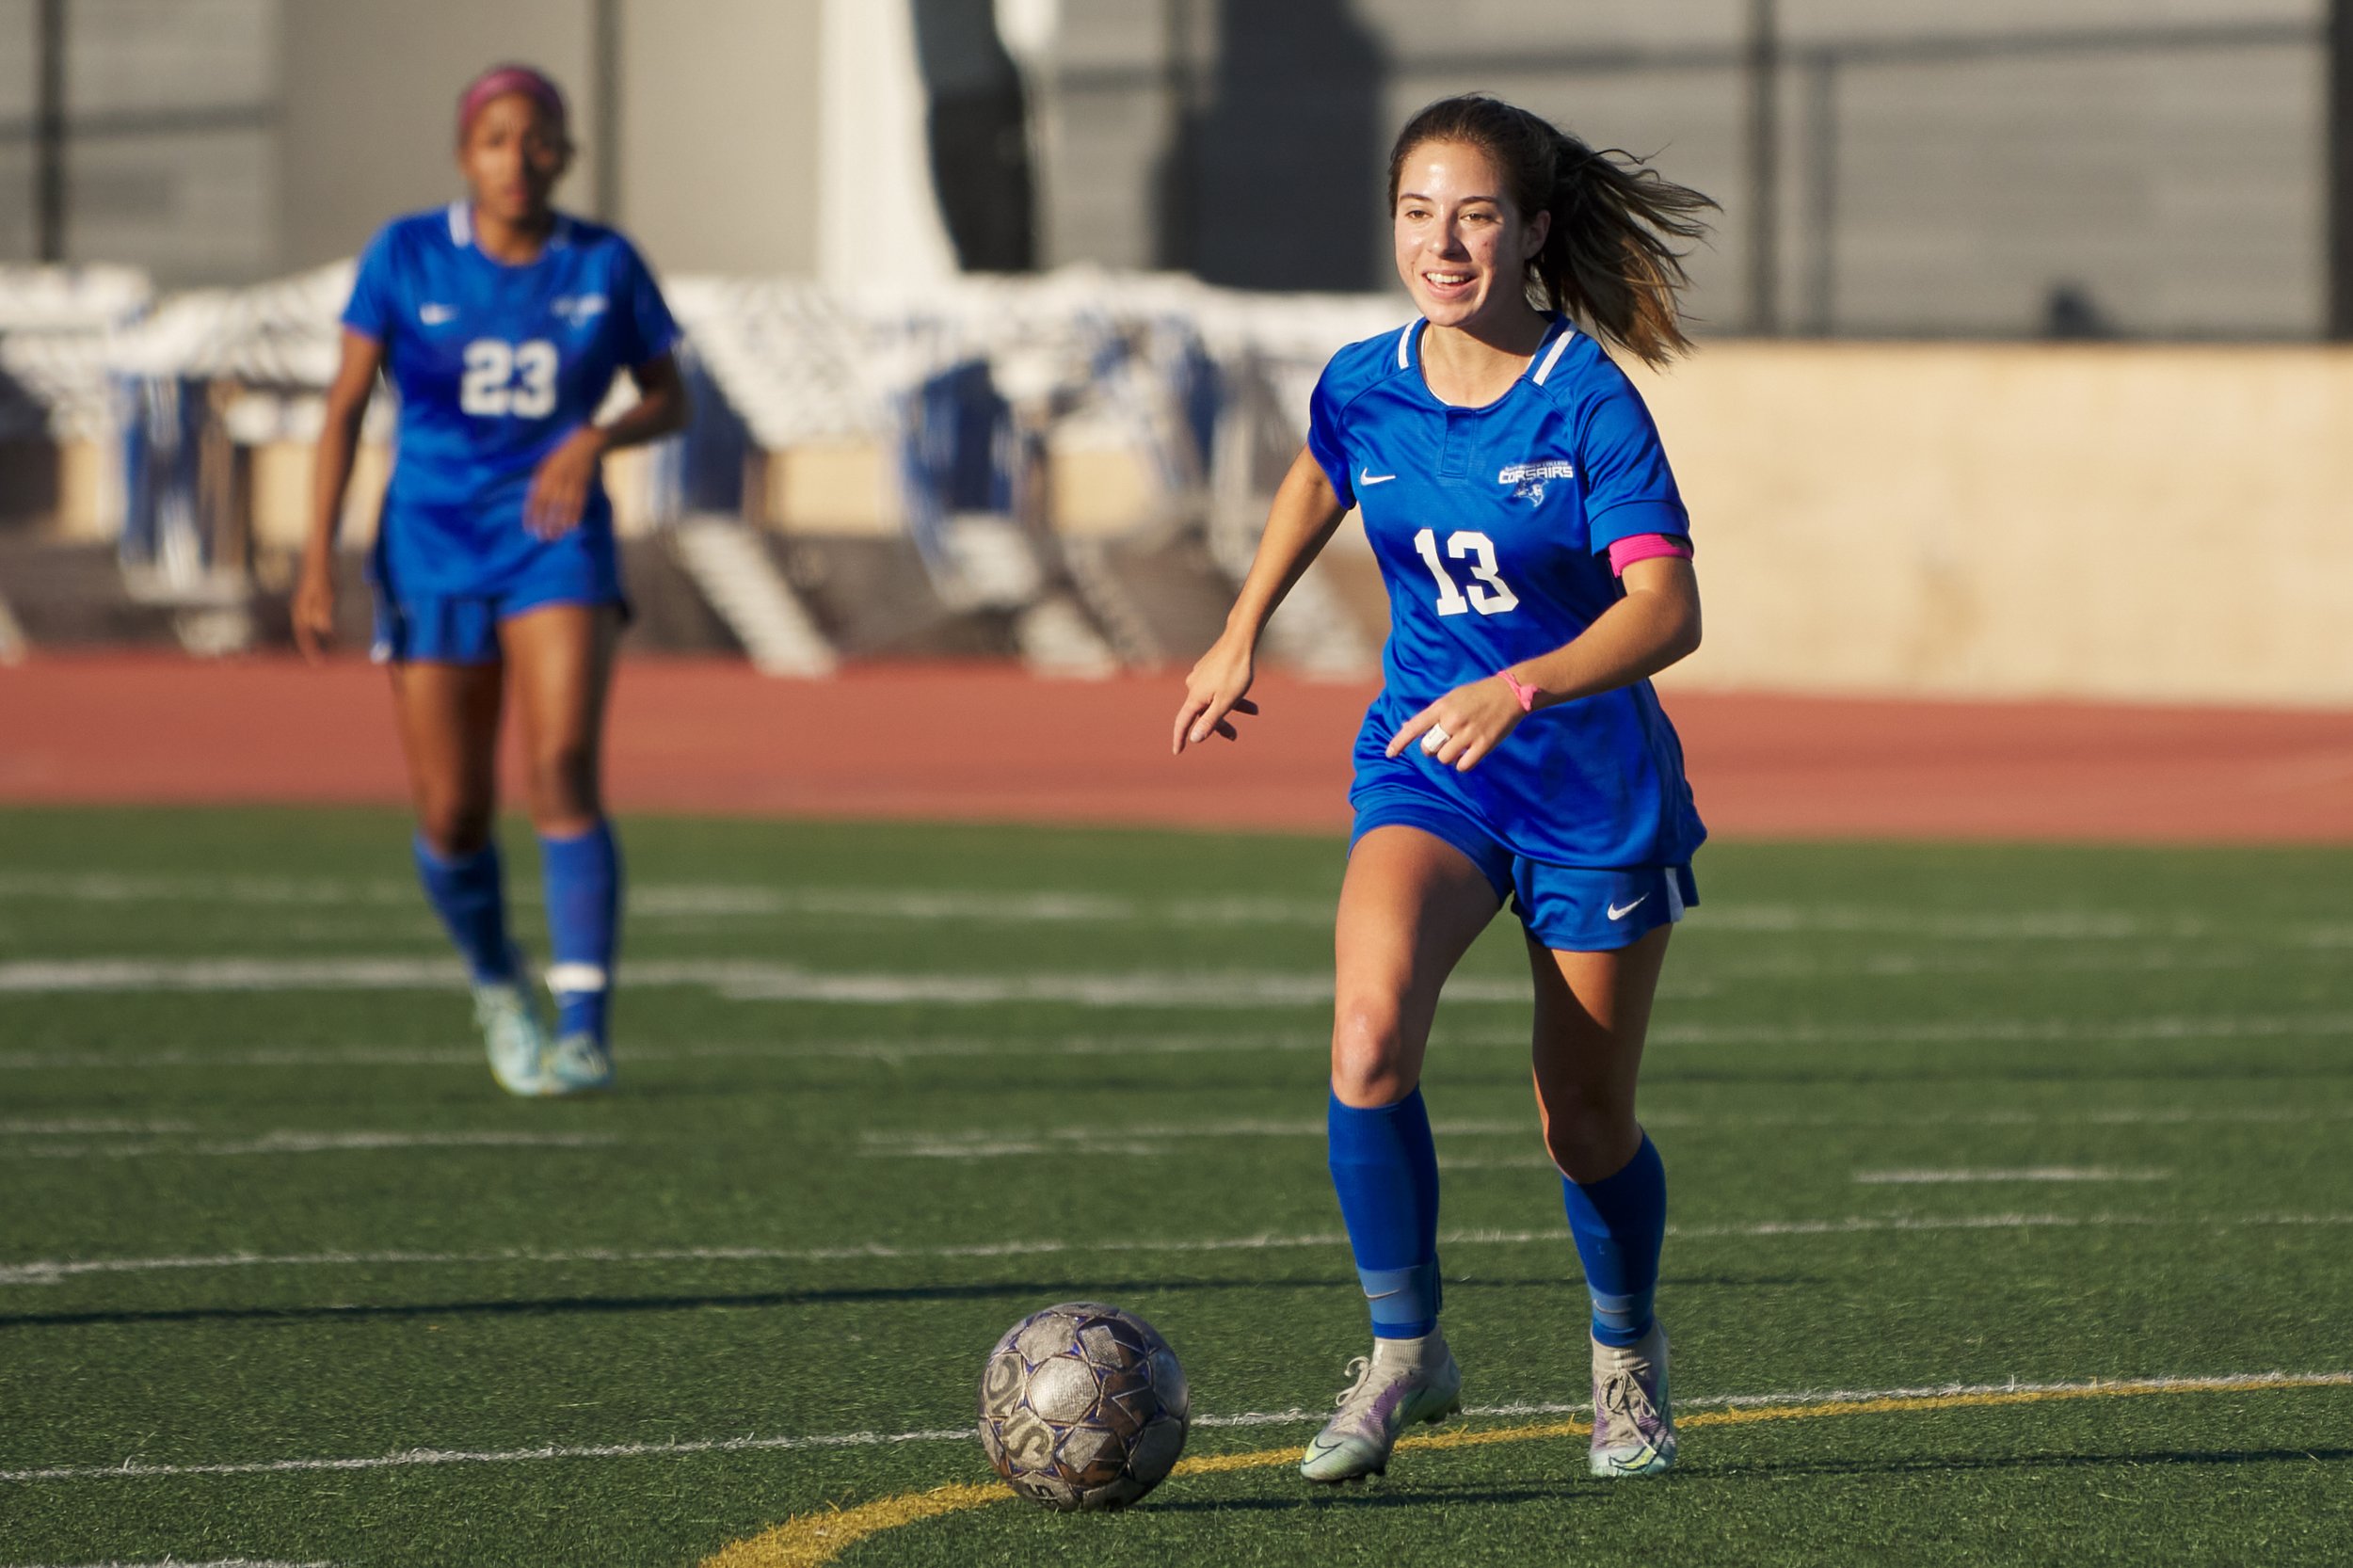  Santa Monica College Corsairs' Sophie Doumitt (right) and Carmen Talavera (left) during the women's soccer match against the College of the Canyons Cougars on Thursday, Nov. 10, 2022, at Corsair Field in Santa Monica, Calif. The Corsairs lost 3-0. (